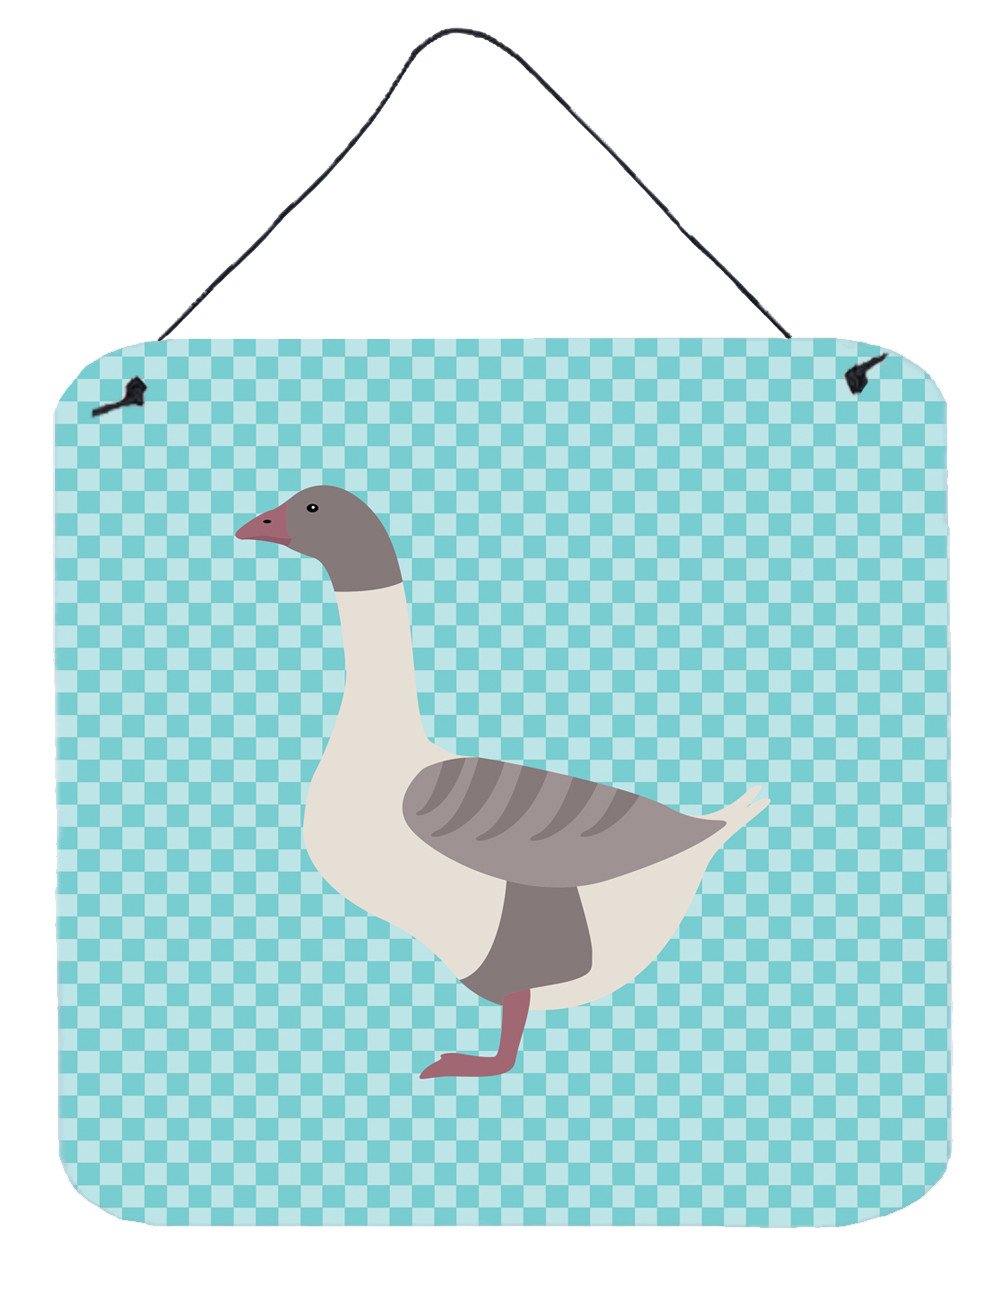 Buff Grey Back Goose Blue Check Wall or Door Hanging Prints BB8075DS66 by Caroline's Treasures